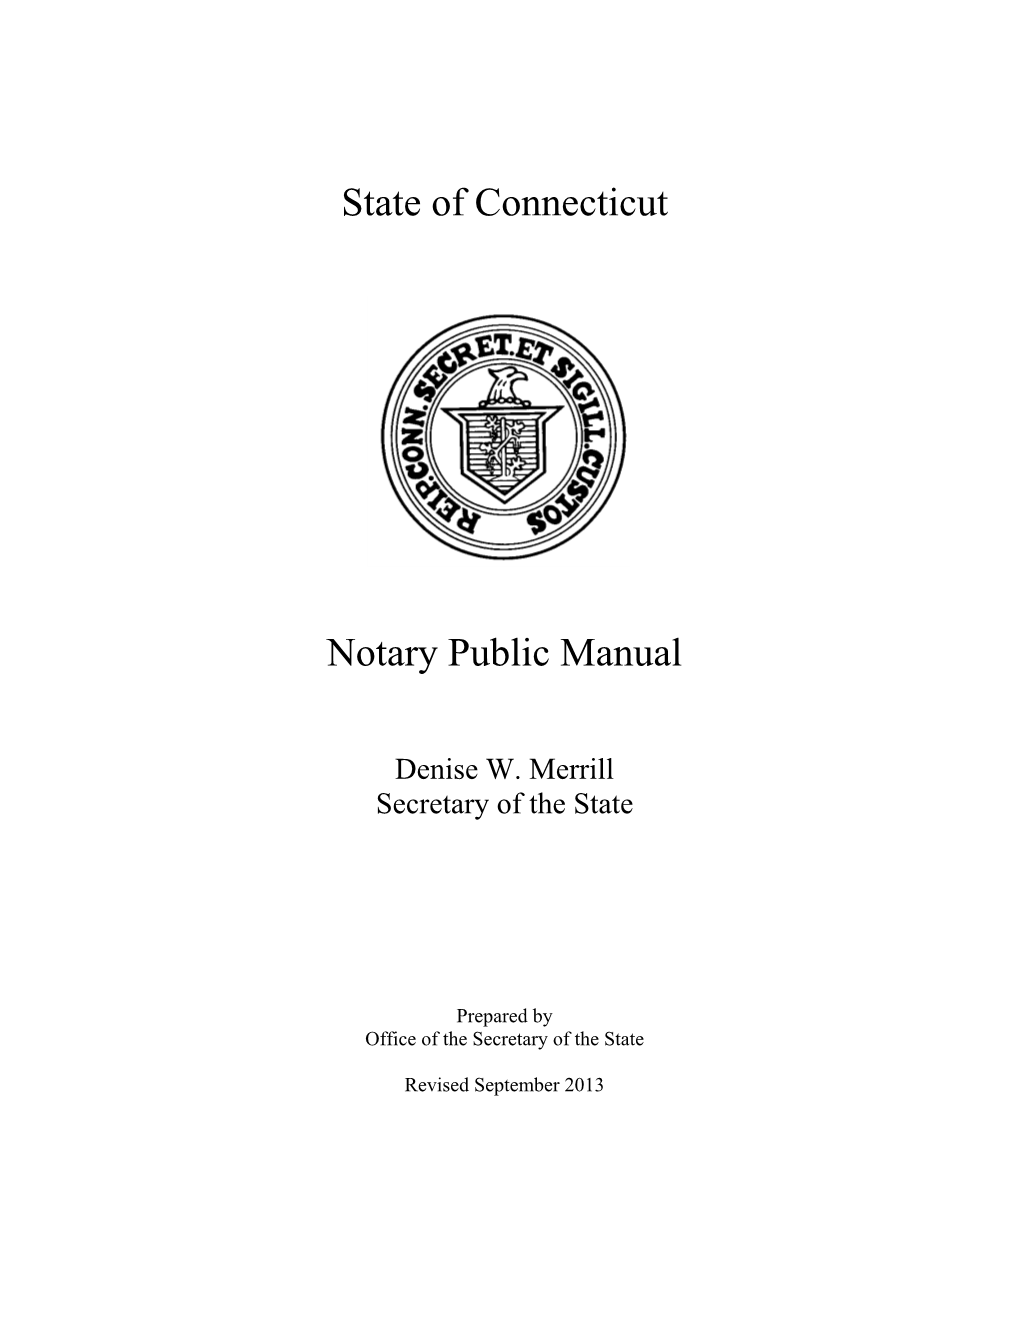 State of Connecticut Notary Public Manual